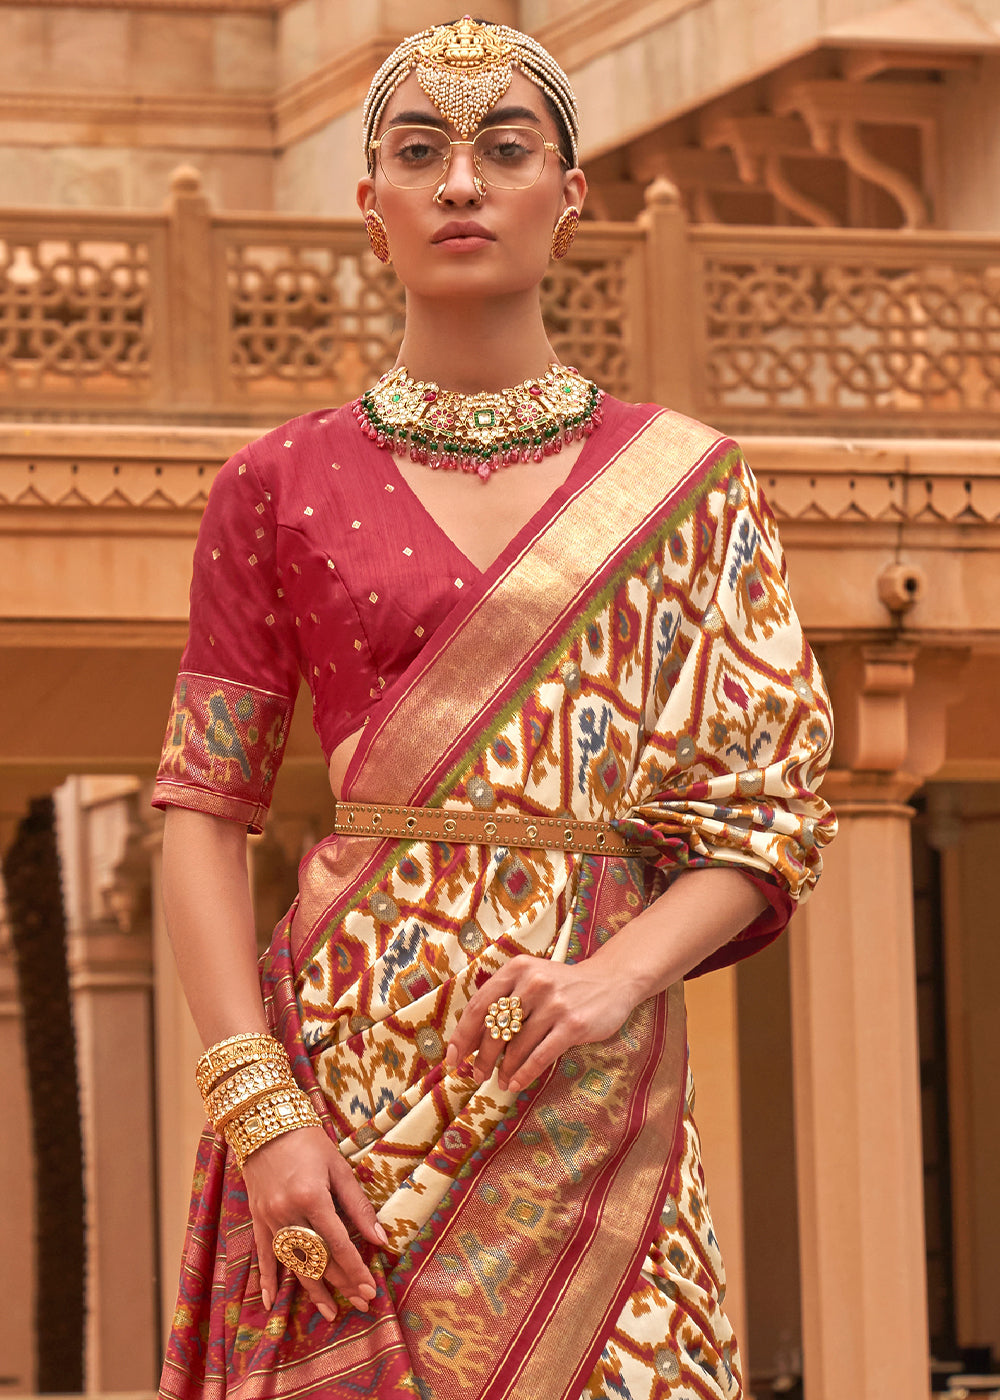 OFF WHITE AND BRICK RED WOVEN TRADITIONAL PATOLA SILK SAREE WITH FOIL PRINT WORK